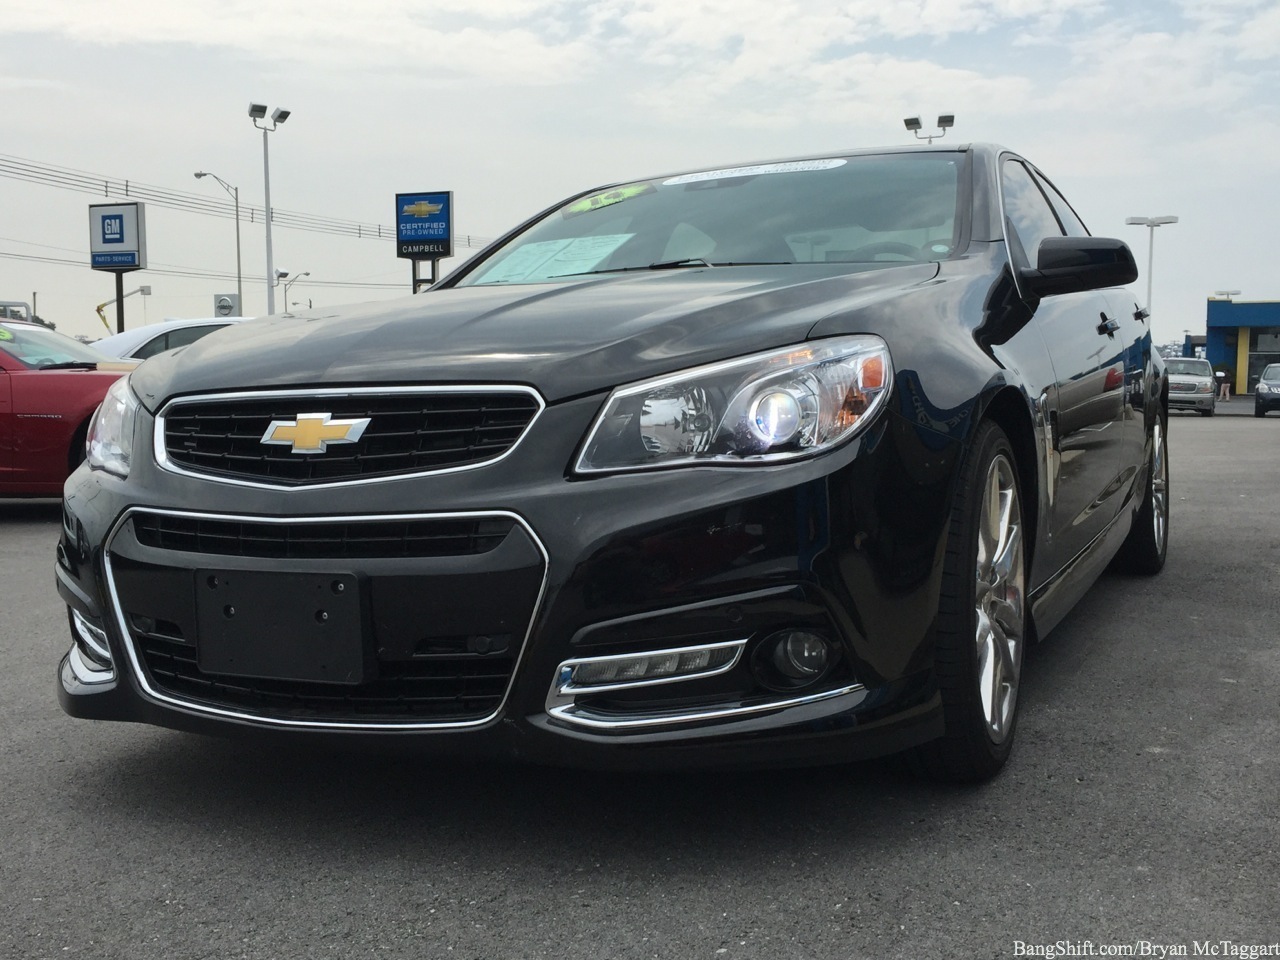 BangShift Test Drive: Chevrolet SS – An American Sedan That Hides A Split Personality In A Discreet Package